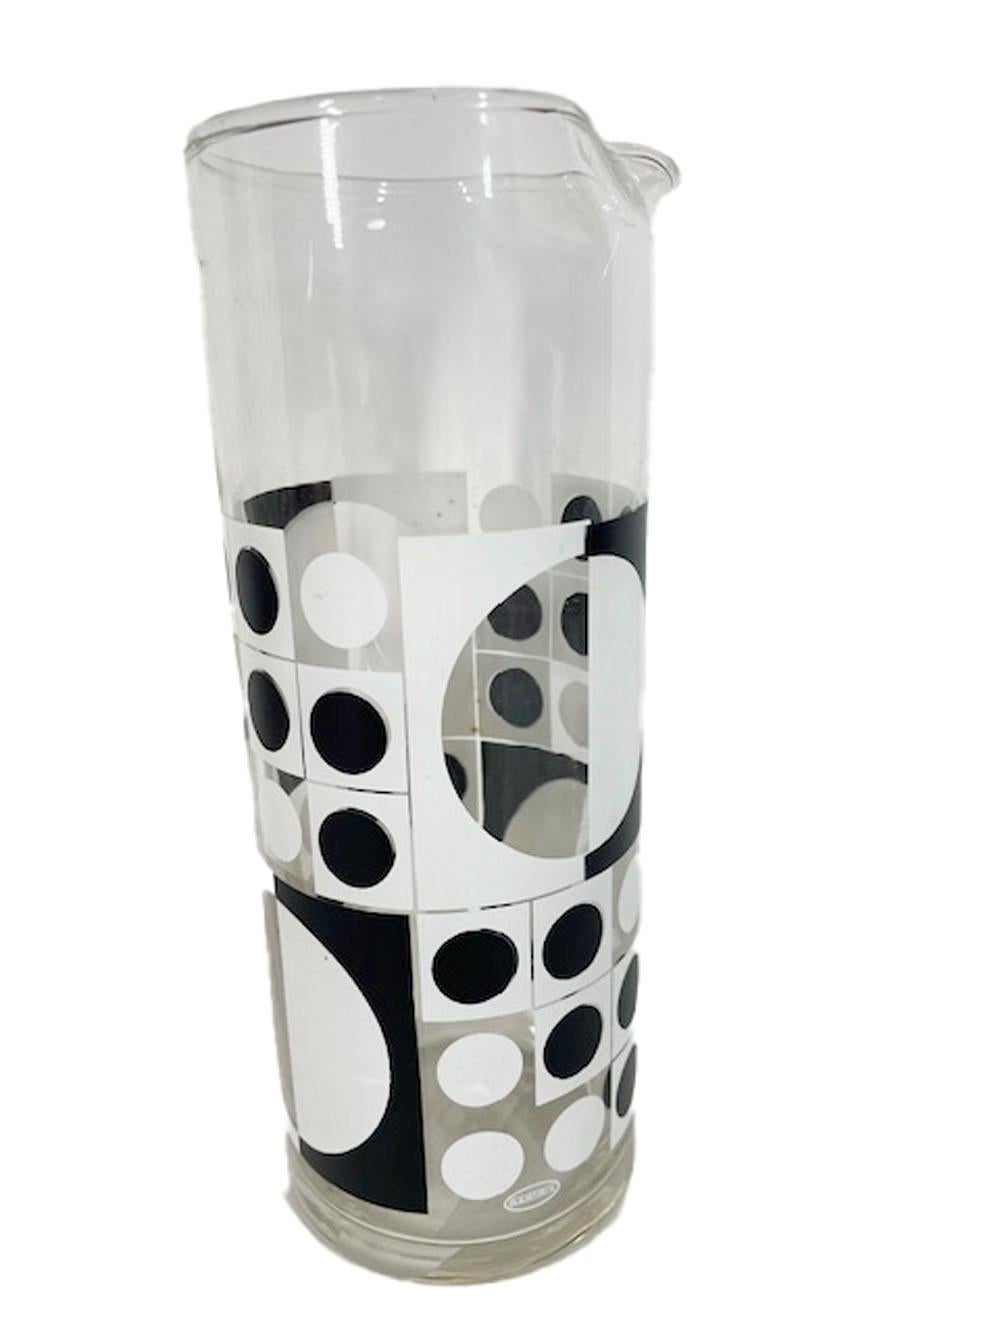 9 Piece cocktail set by Bartrix / Cera Glassware in a black and white Op-Art Verner Panton style design. Included are six stacking rocks glasses and a cocktail pitcher along with an oval vinyl clad cheese board with ceramic tile insert and cheese